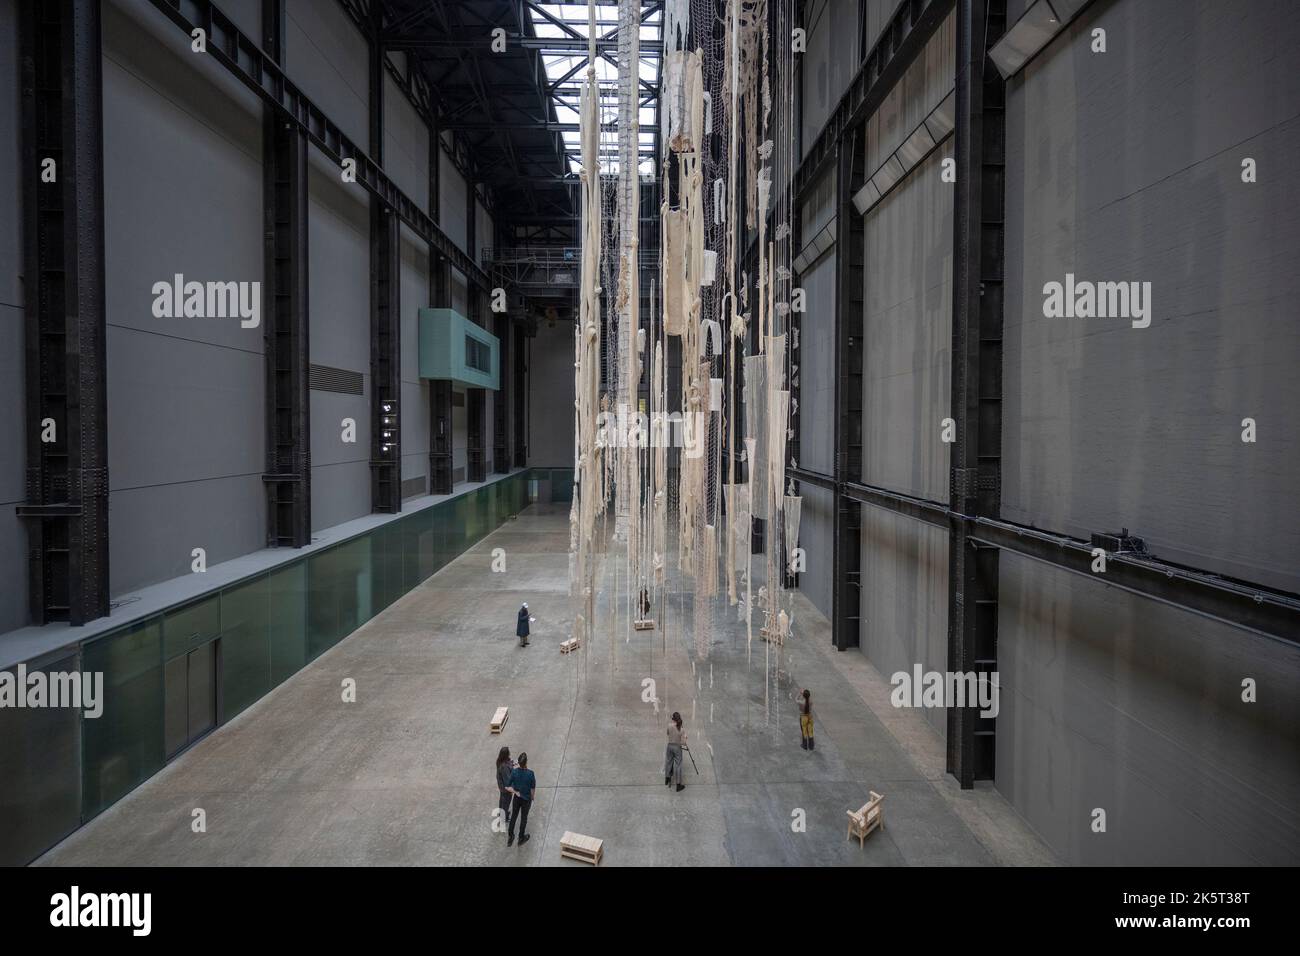 Tate Modern, London, UK. 10 October 2022. A new sculptural work within the iconic surrounds of Tate Modern’s Turbine Hall is unveiled. This ambitious installation has been devised by artist Cecilia Vicuña for the 2022 Hyundai Commission and runs from 11 October 2022-16 April 2023. Credit: Malcolm Park/Alamy Live News Stock Photo